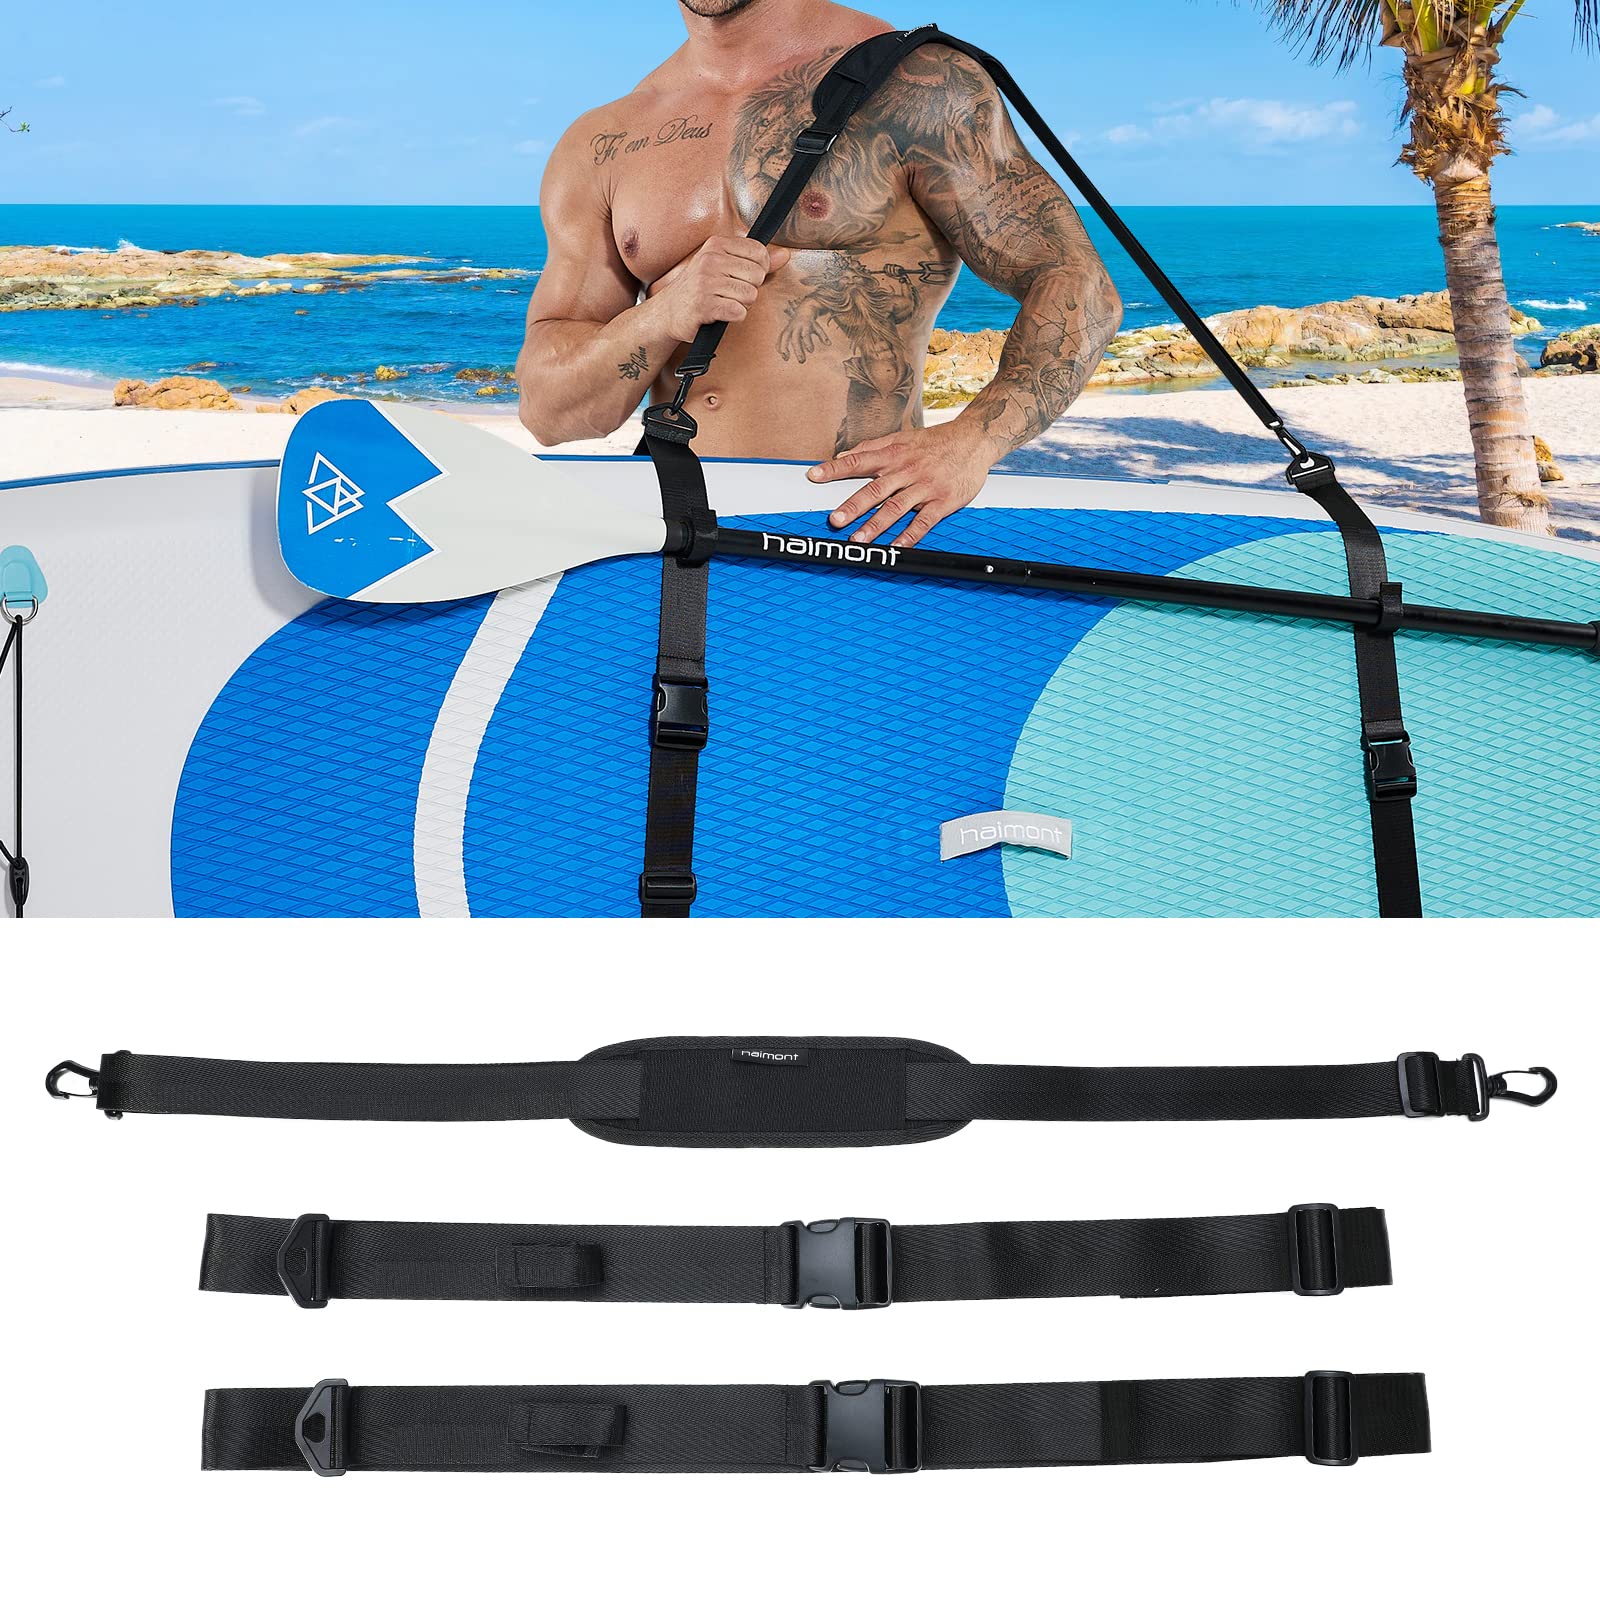 Haimont Paddle Board Carry Strap, Adjustable Heavy-Duty SUP Carrying Strap  Padded Over The Shoulder Sling